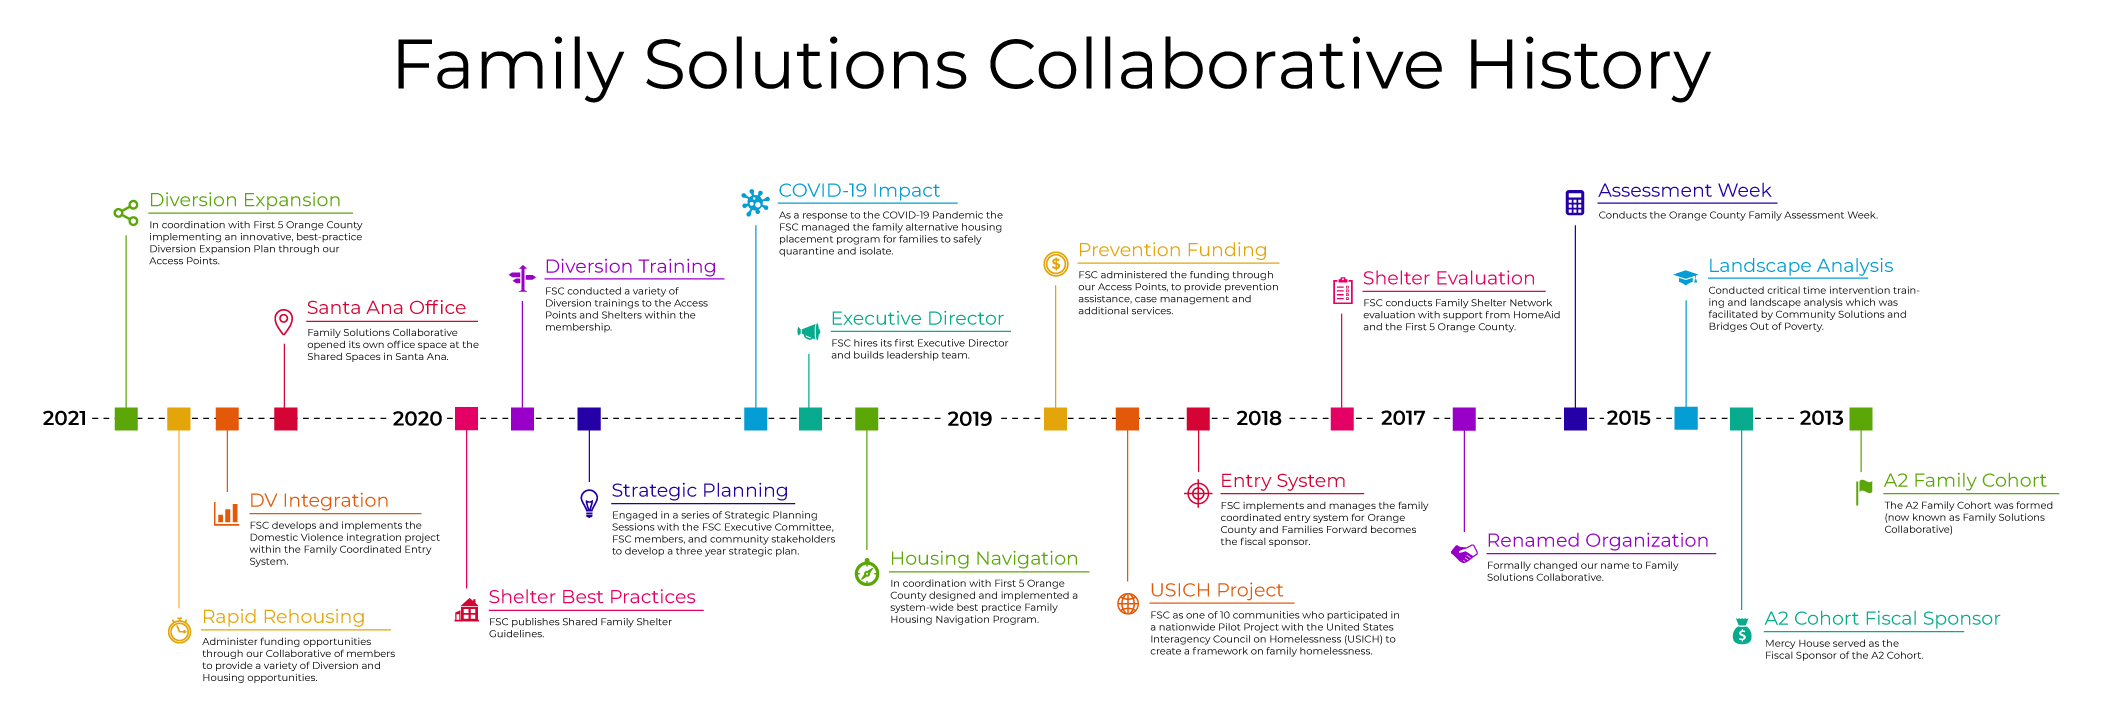 Family Solutions Collaborative History